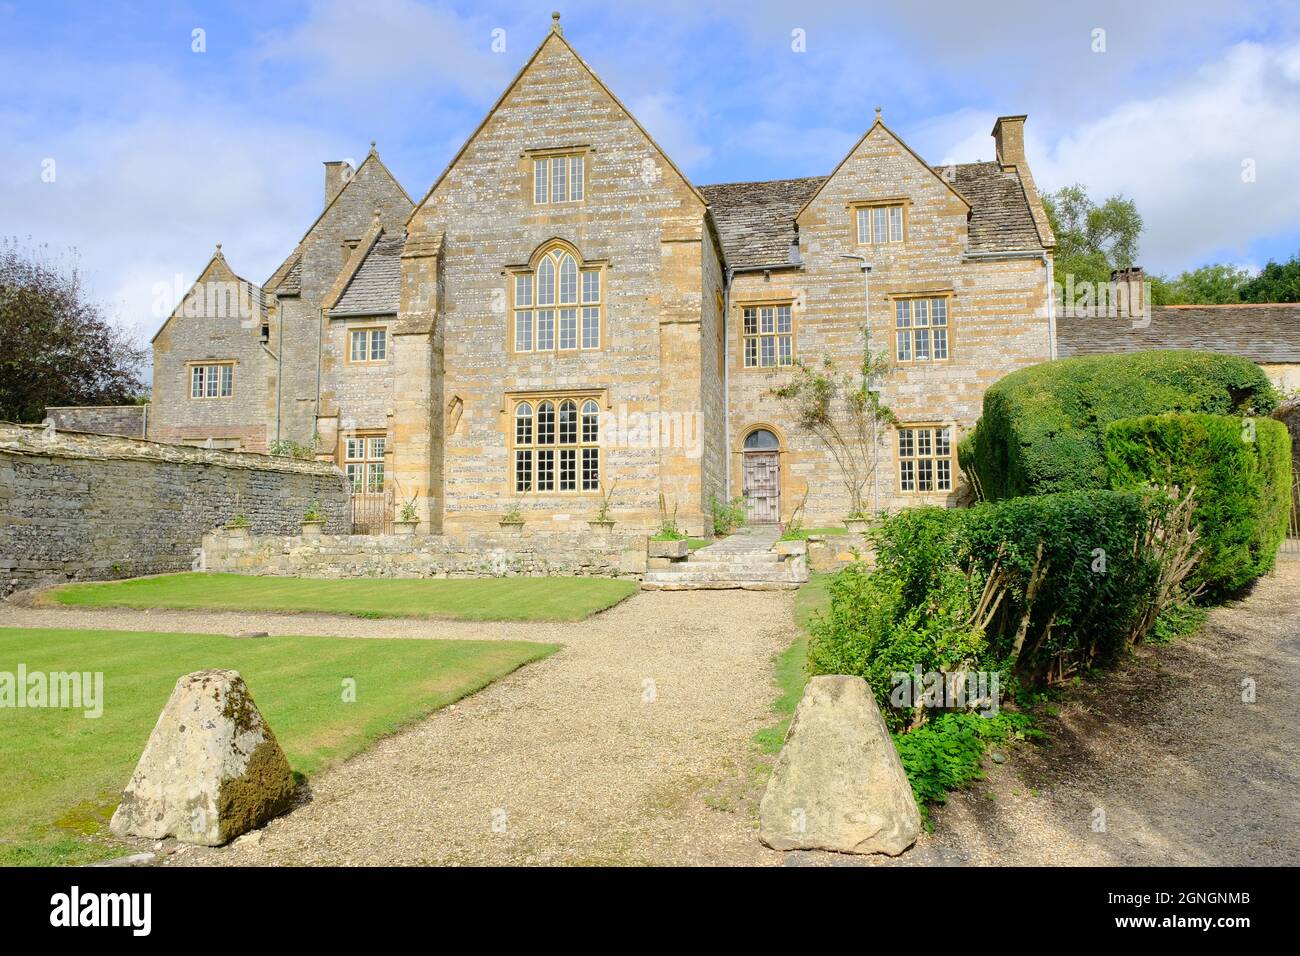 England, UK - September 2021: The Cerne Abbey House in the town of Cerne Abbas in Dorset, England Stock Photo